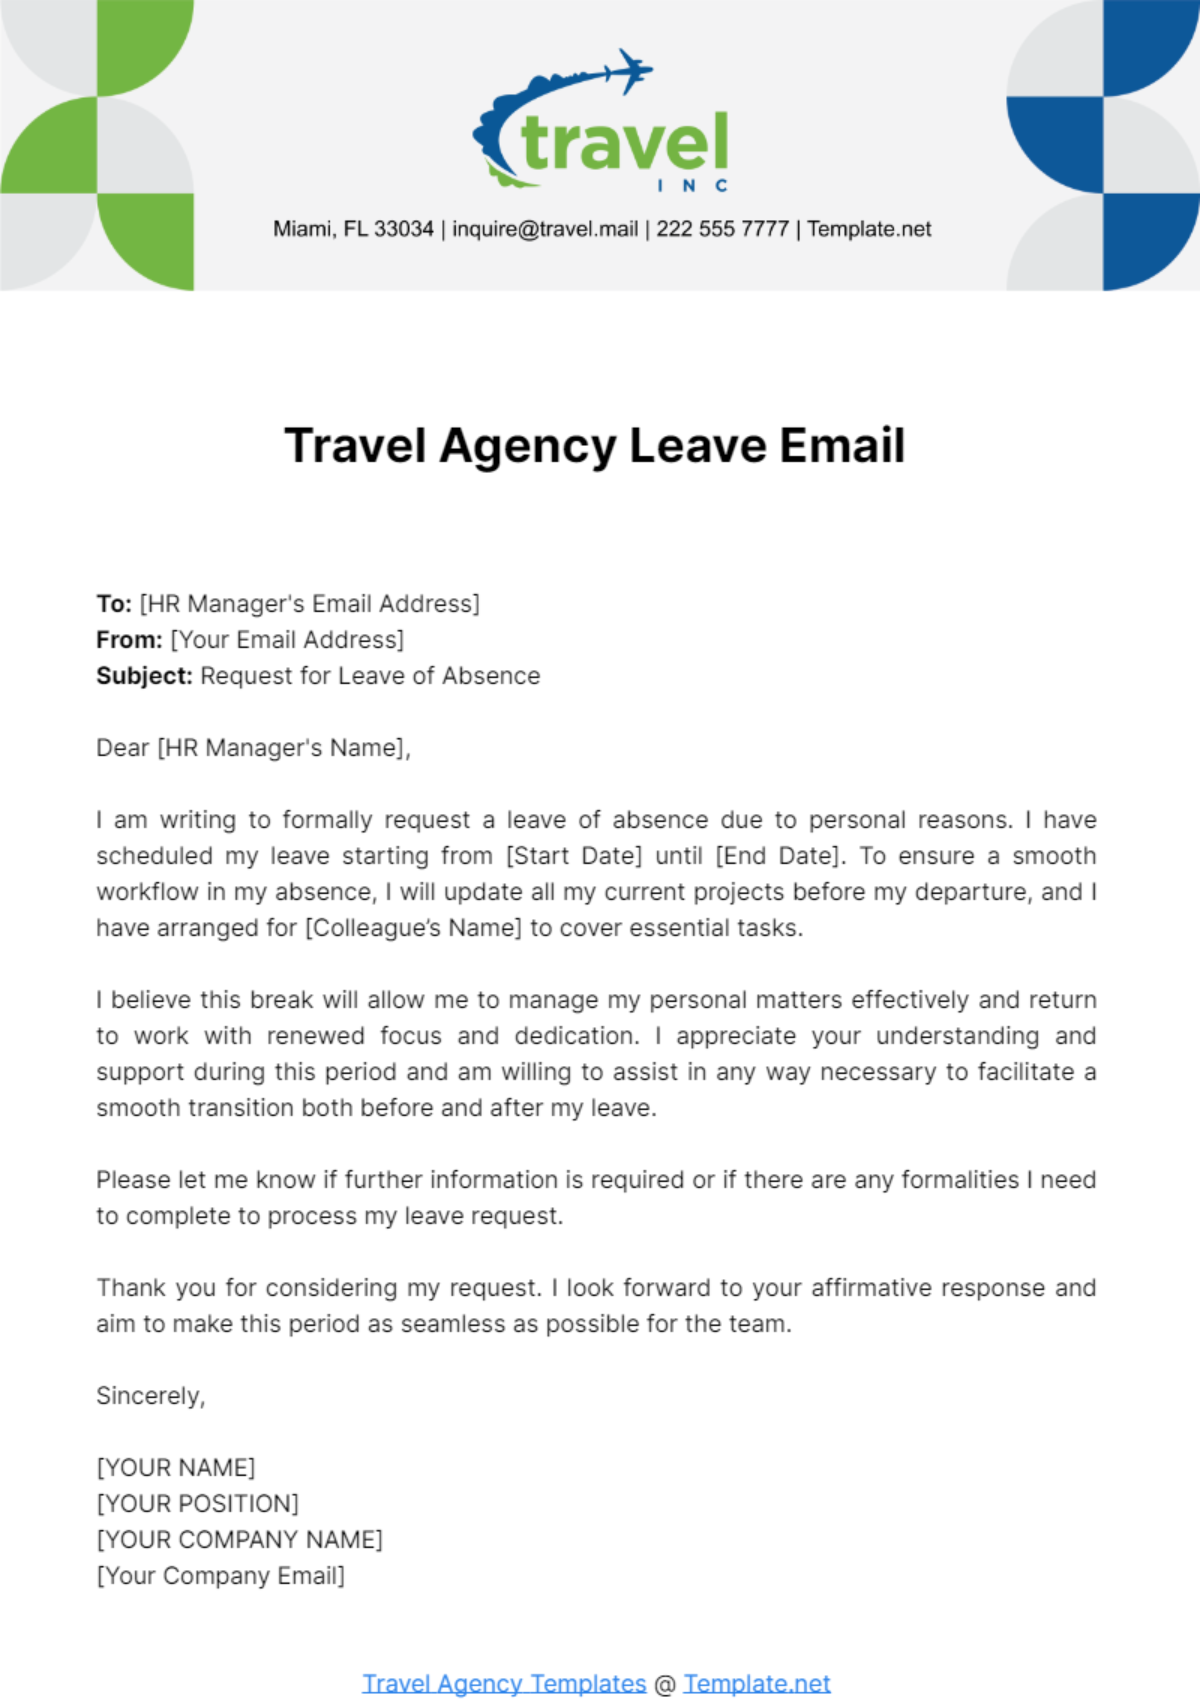 Travel Agency Leave Email Template